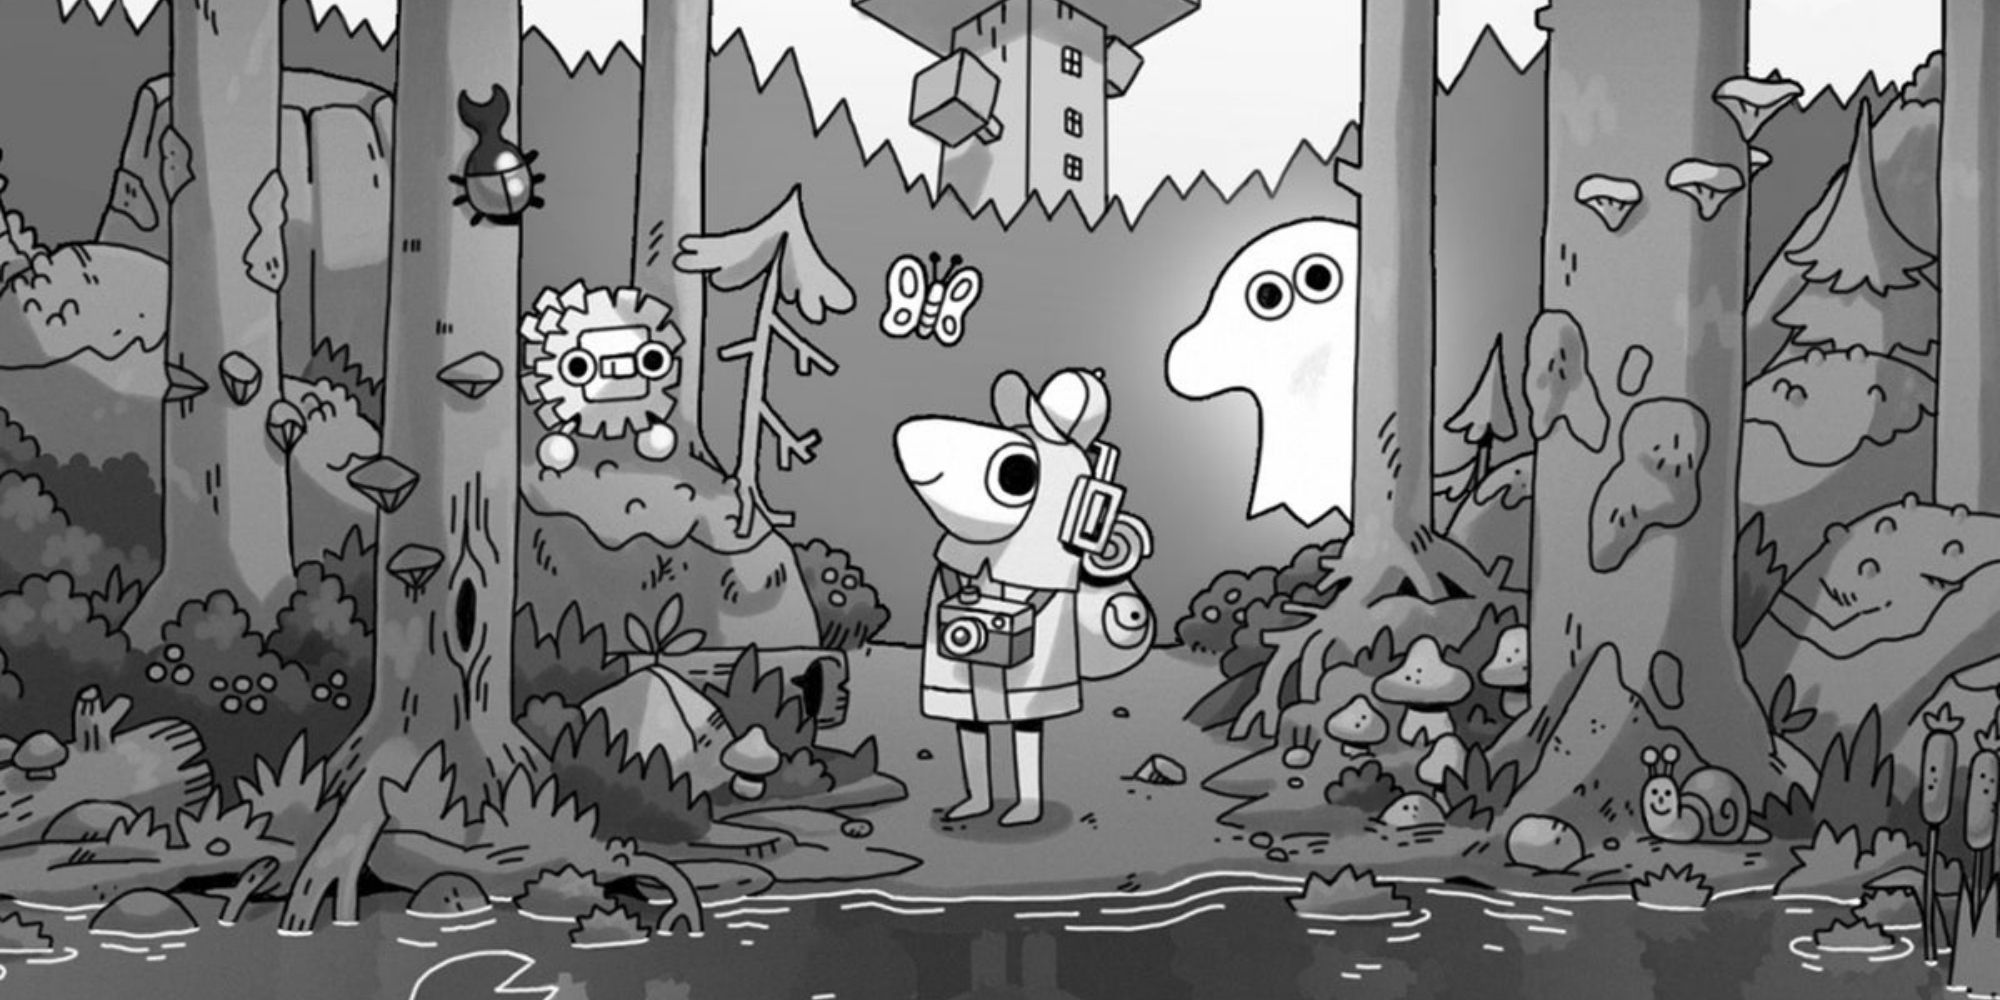 Toem Character Stands By Pond In Woods With Ghosts and Critters Behind Him